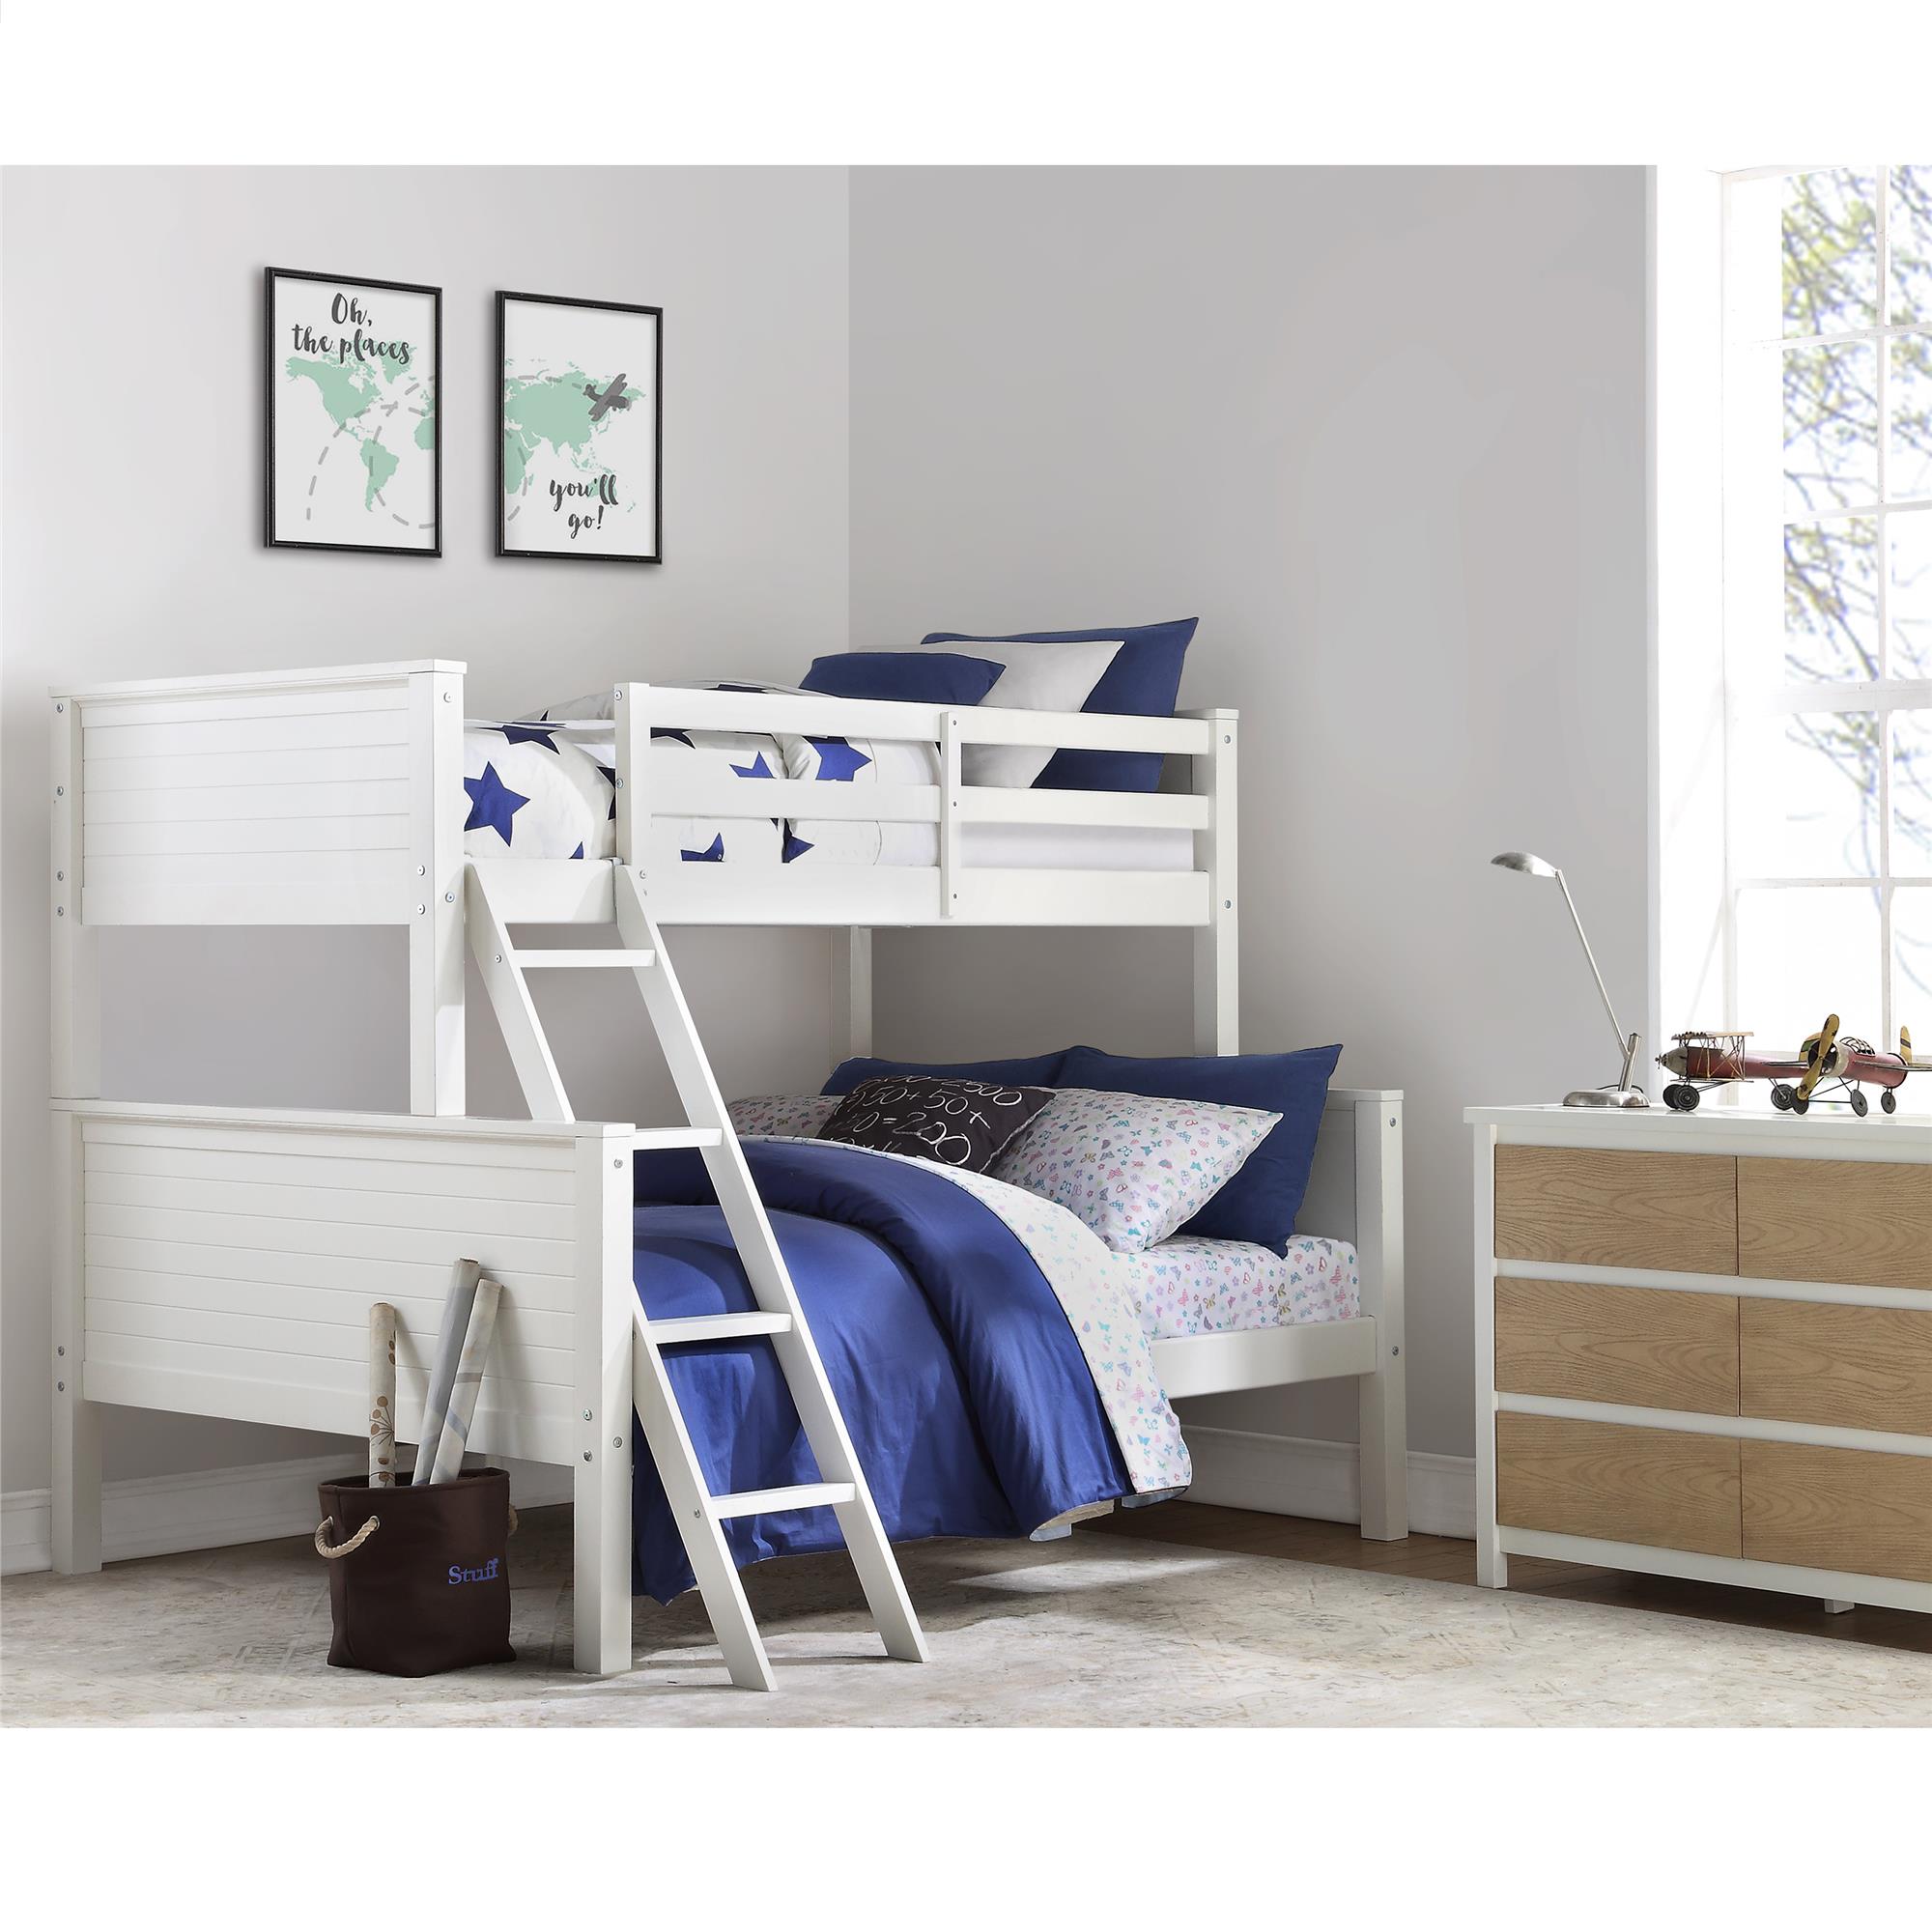 Mainstays Premium Twin Over Full Bunk Bed, Mainstays Premium Twin Over Full Metal Bunk Bed Multiple Colors